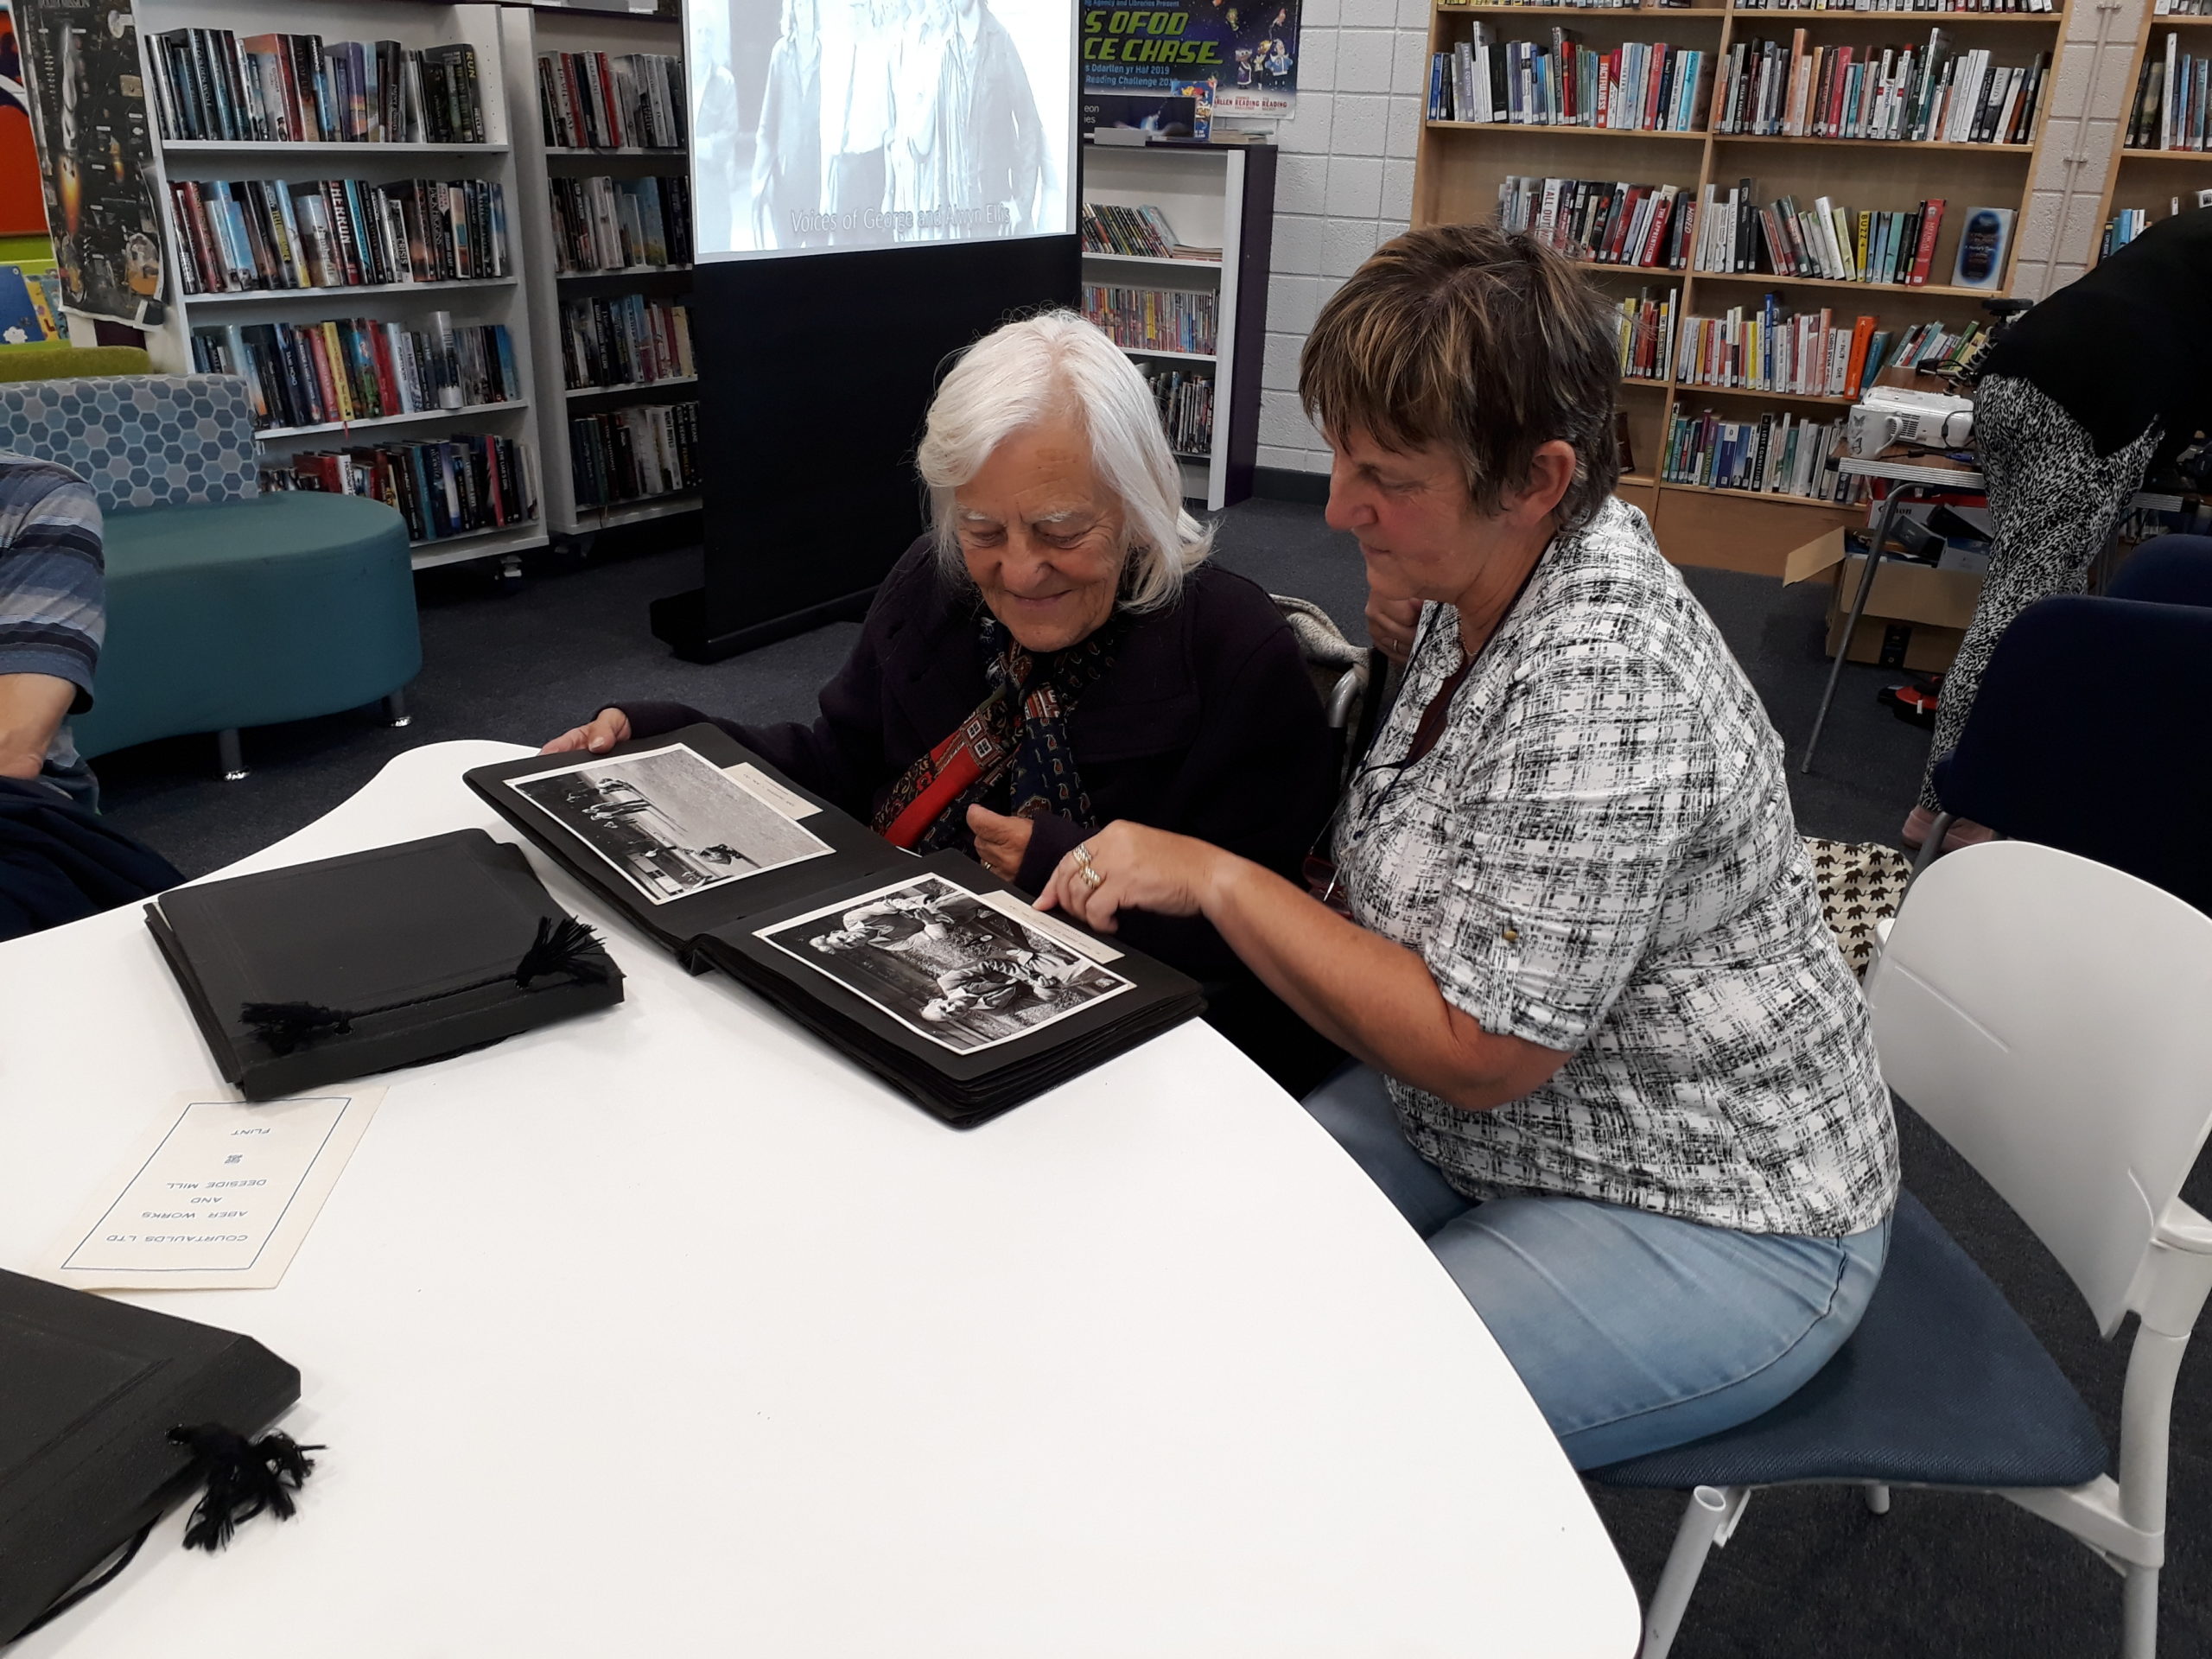 A volunteer discussing Courtauld memories with a visitor in library